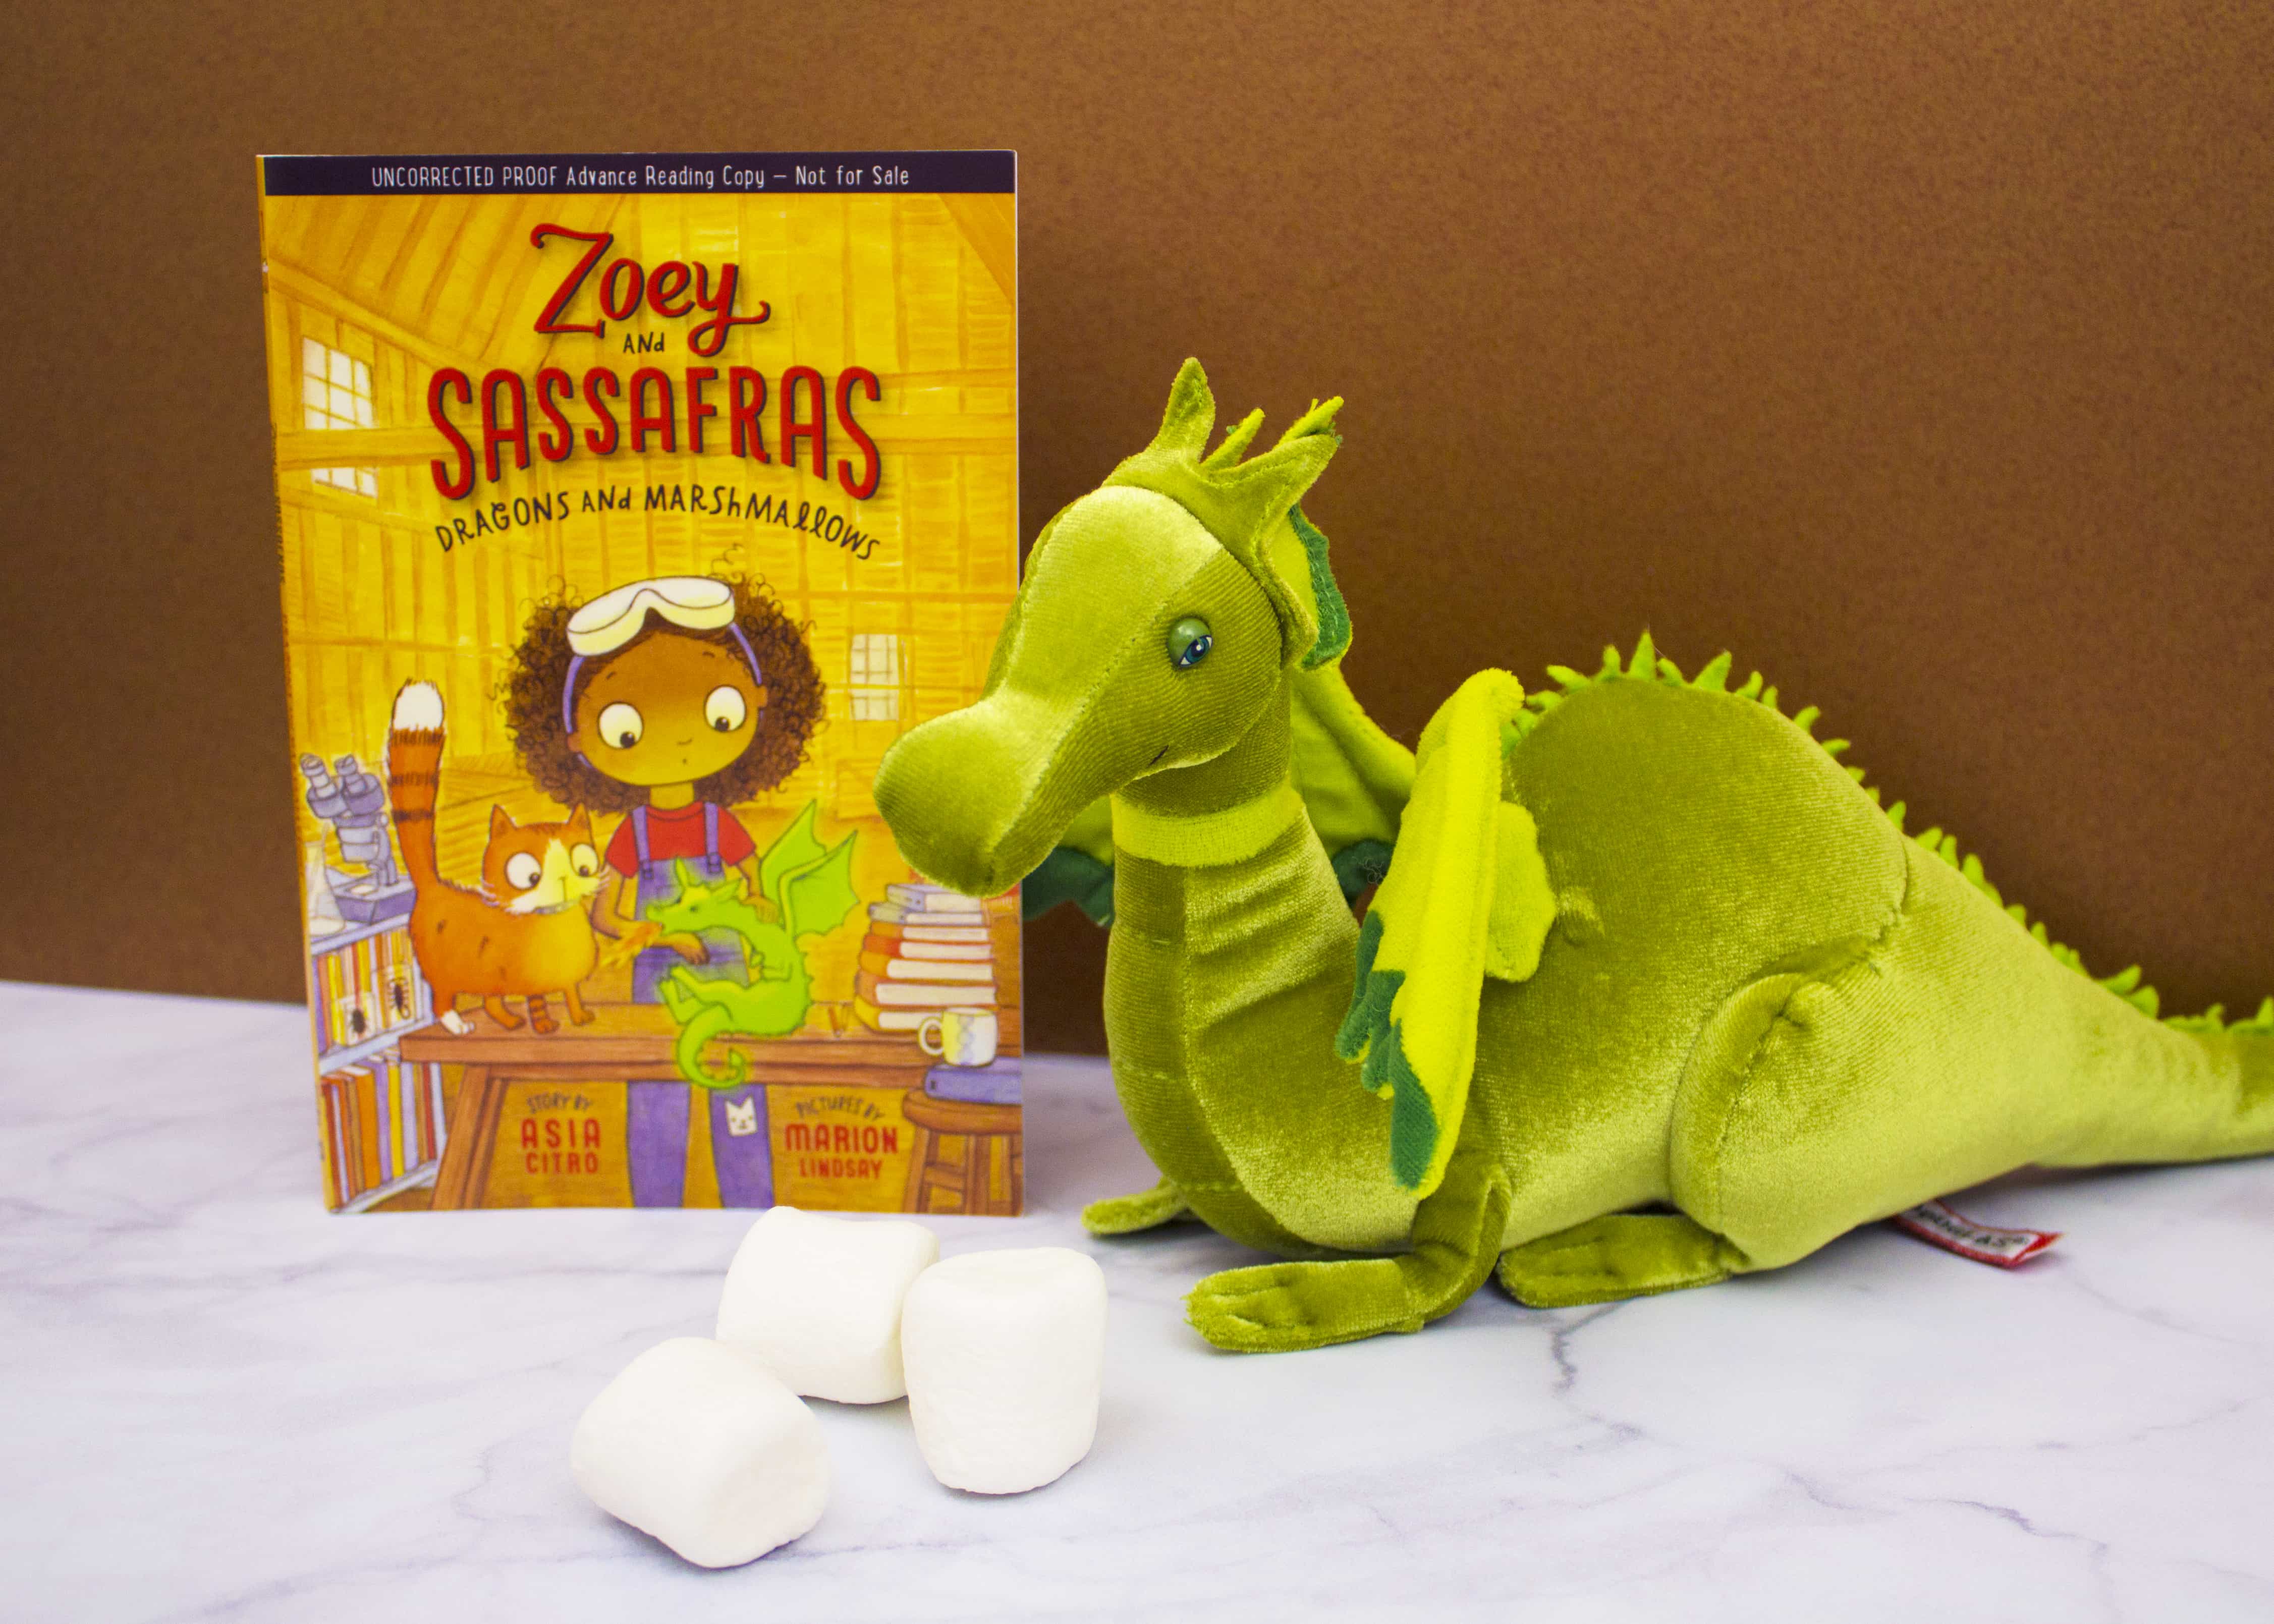 zoey and sassafrass dragons and marshmallows